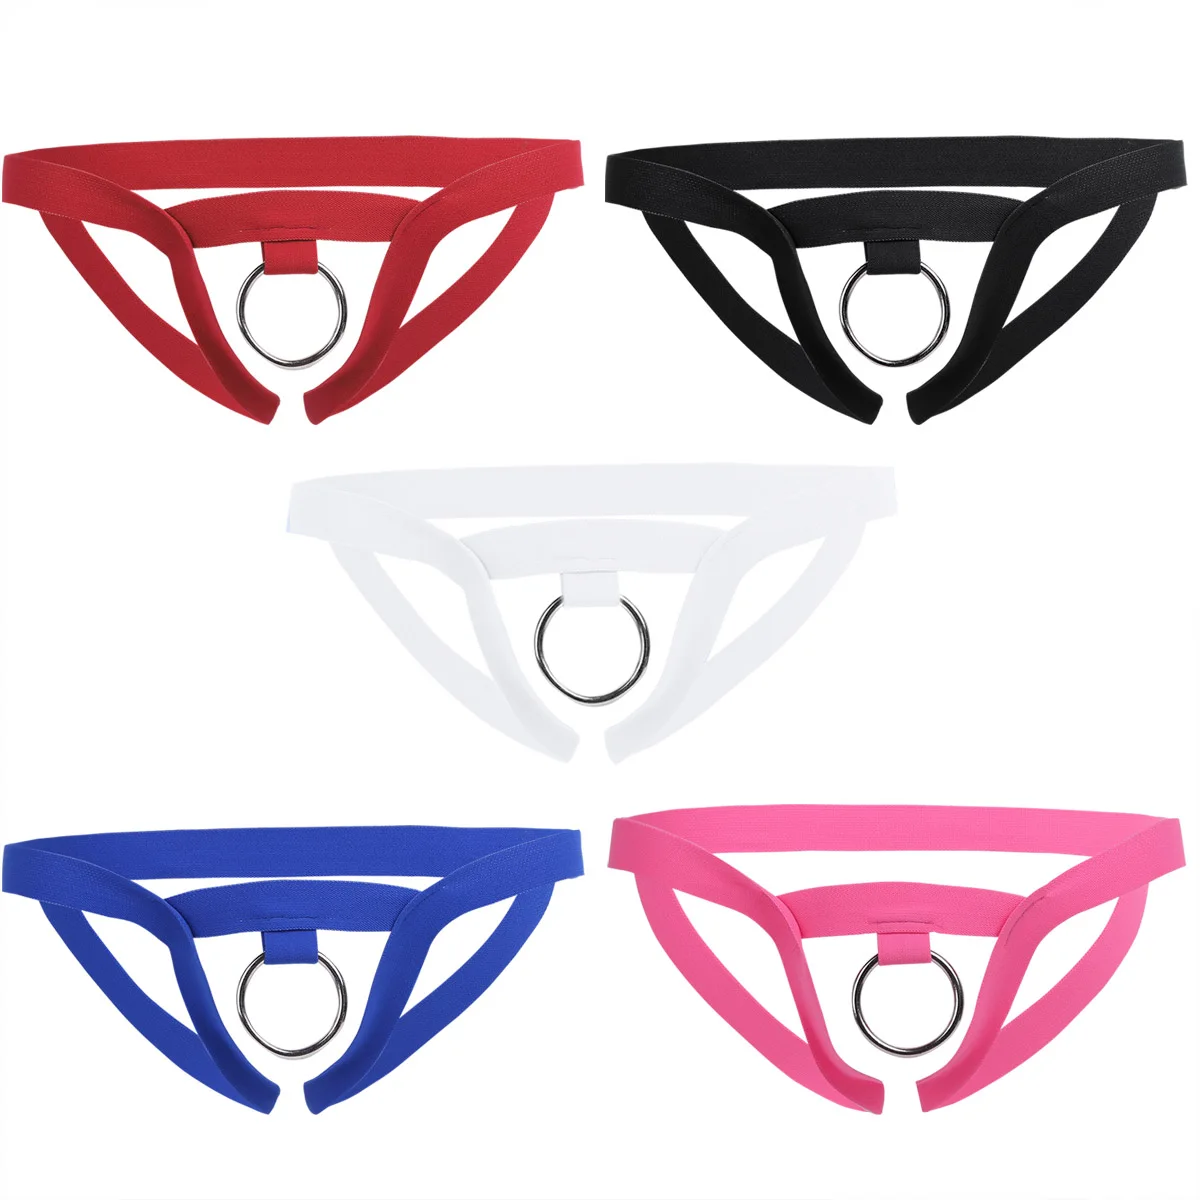 Men Lingerie Sex Gay Male Panties Crotchless G-string Open Butt Bondage Gear Pouch Sissy Penis Underwear Underpants with O-Ring